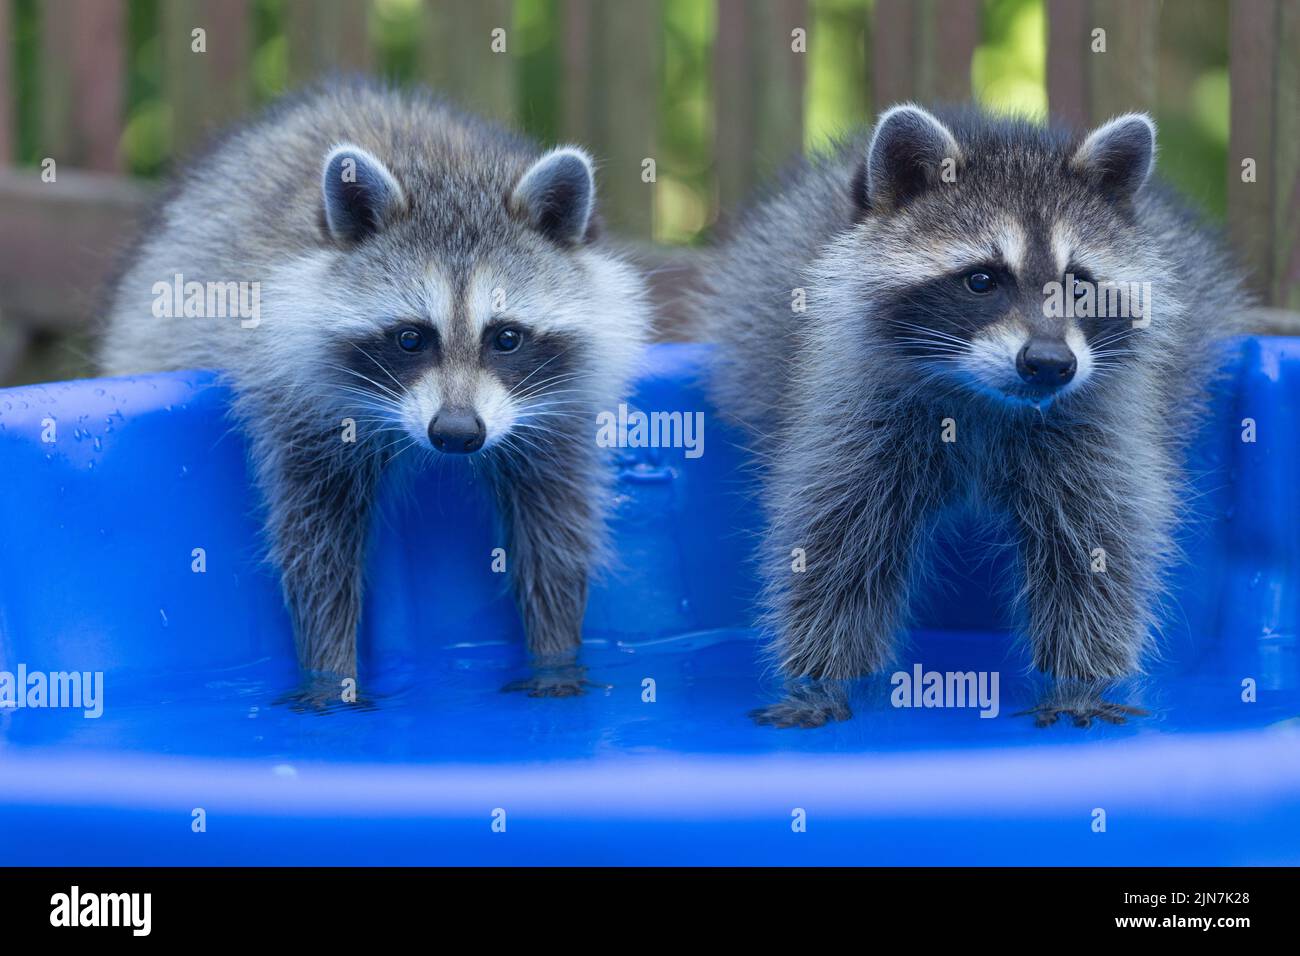 Two baby racoons cooling off with their front paws in a blue plastic swimming poolon a warm summer evening. Stock Photo